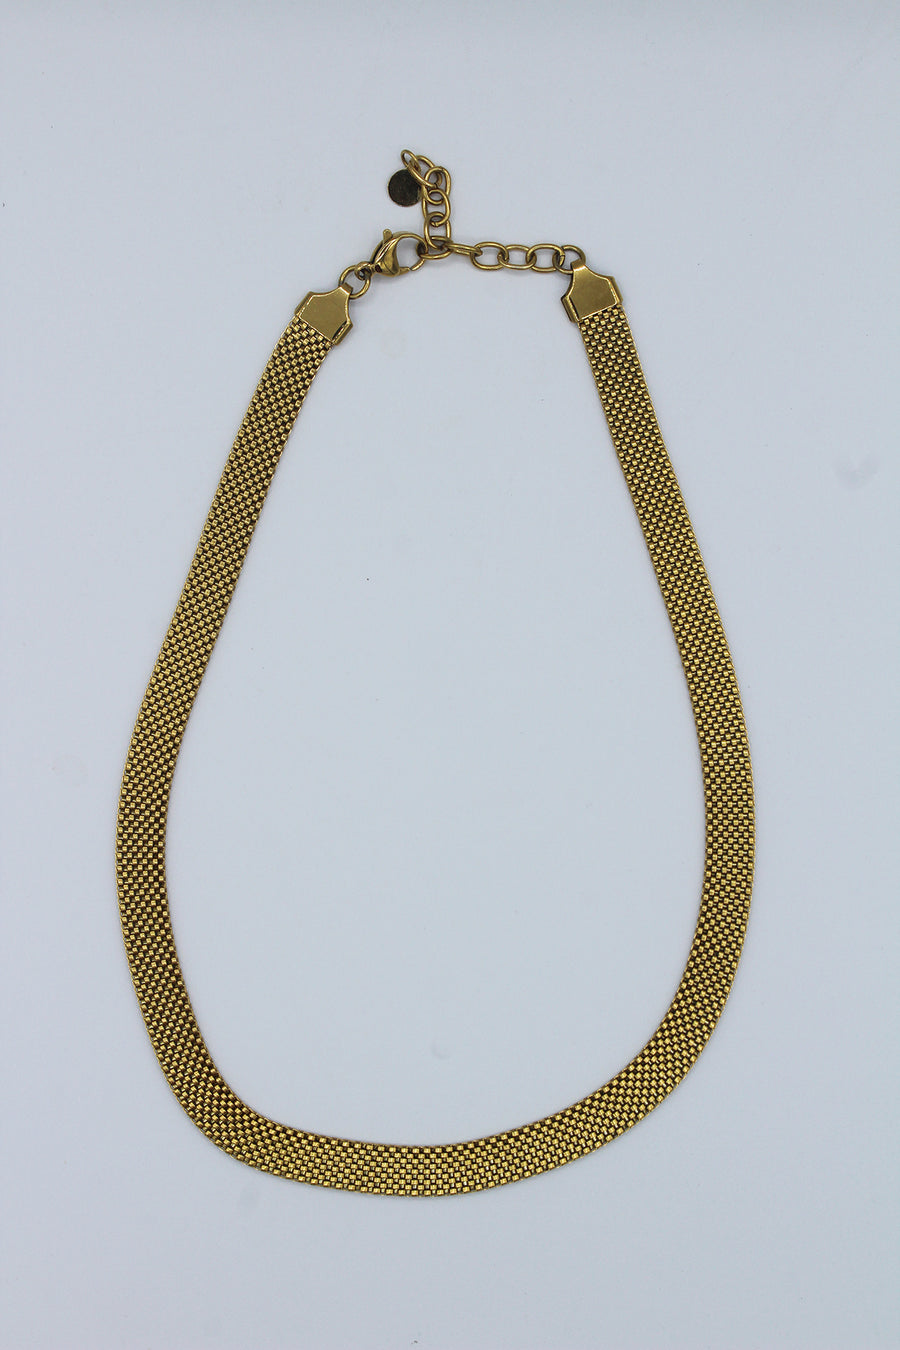 Jawi necklace